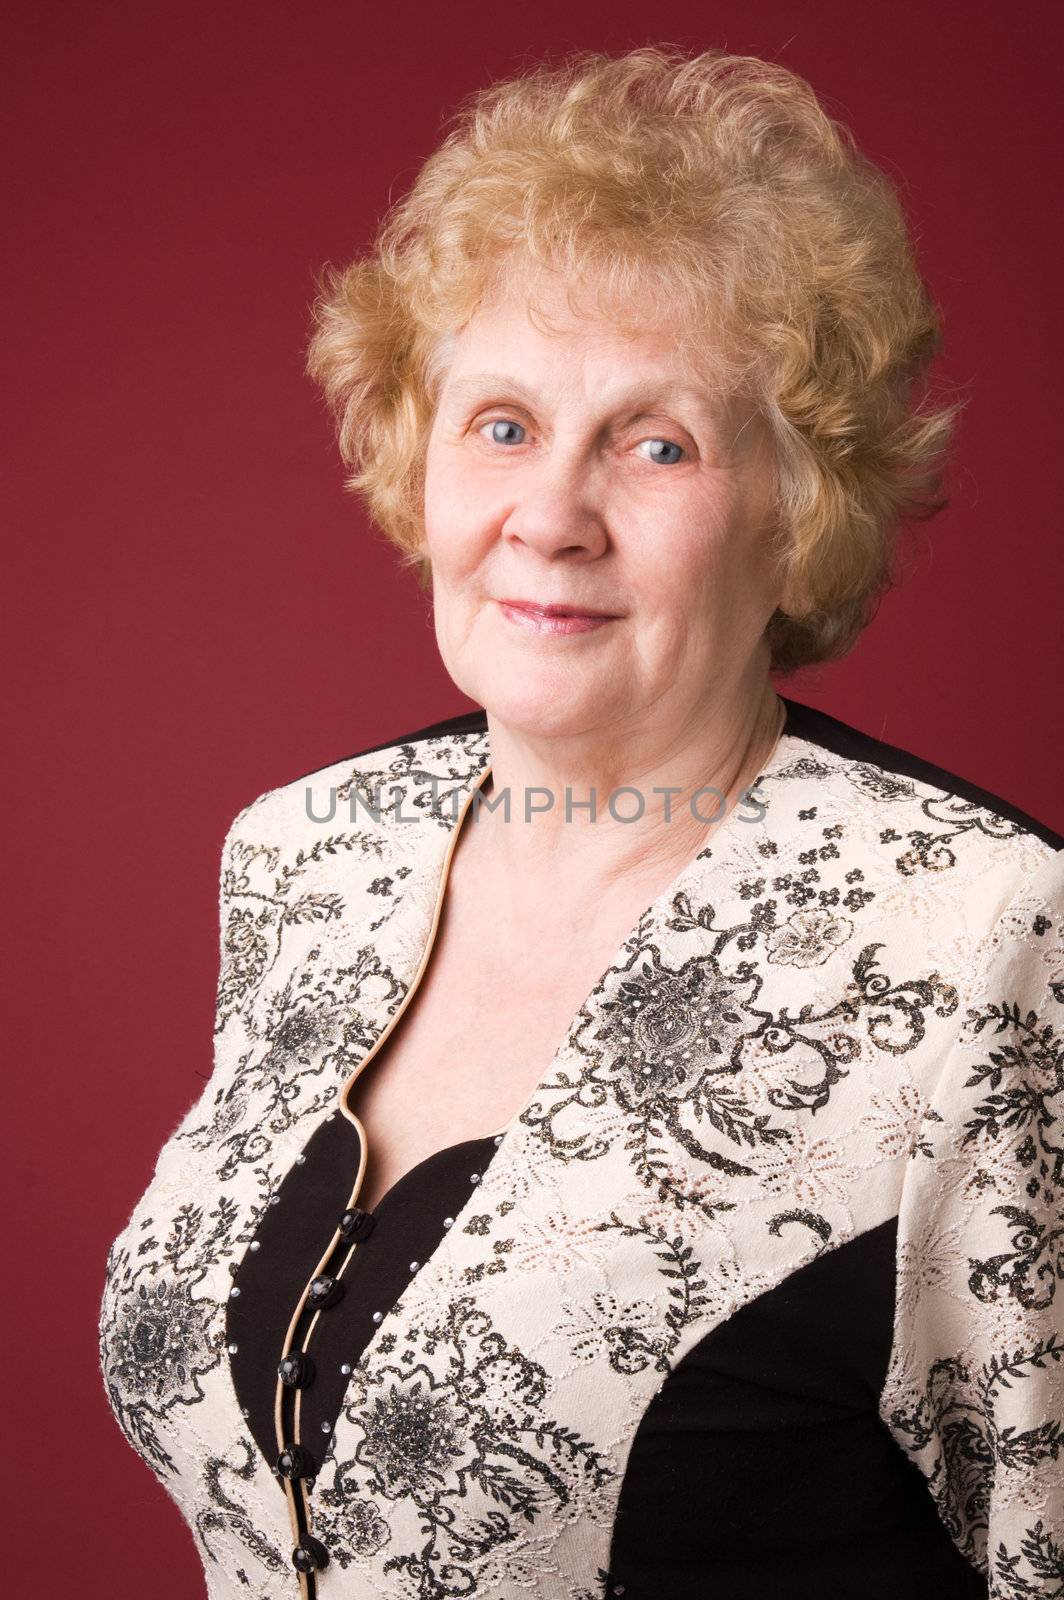 The cheerful elderly woman on a grey background.